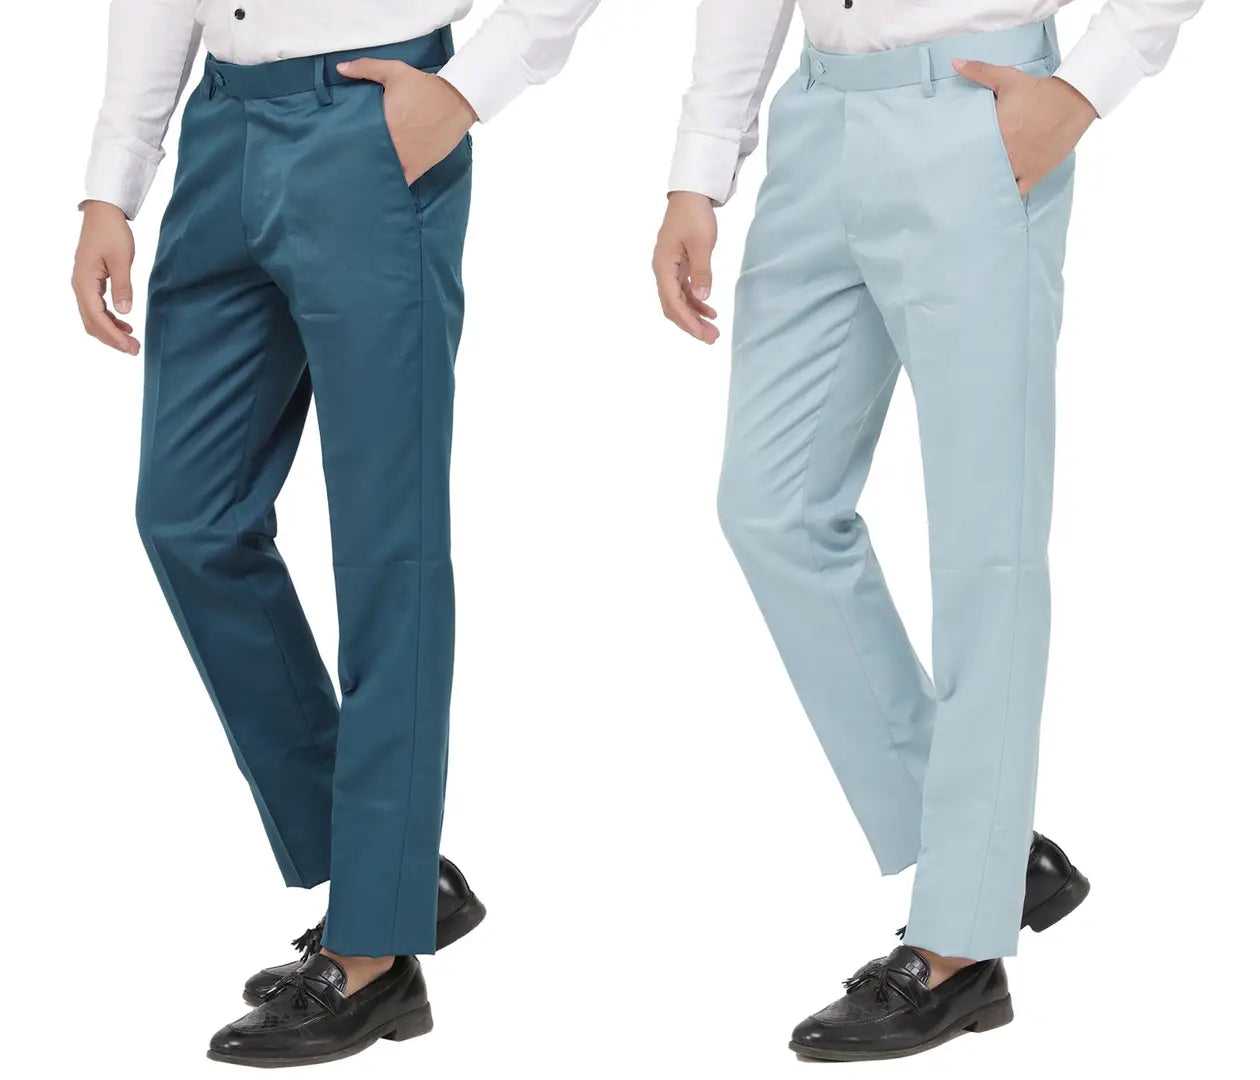 Kundan Men Poly-Viscose Blended Morpich Blue and Light Sky Blue Formal Trousers ( Pack of 2 Trousers )